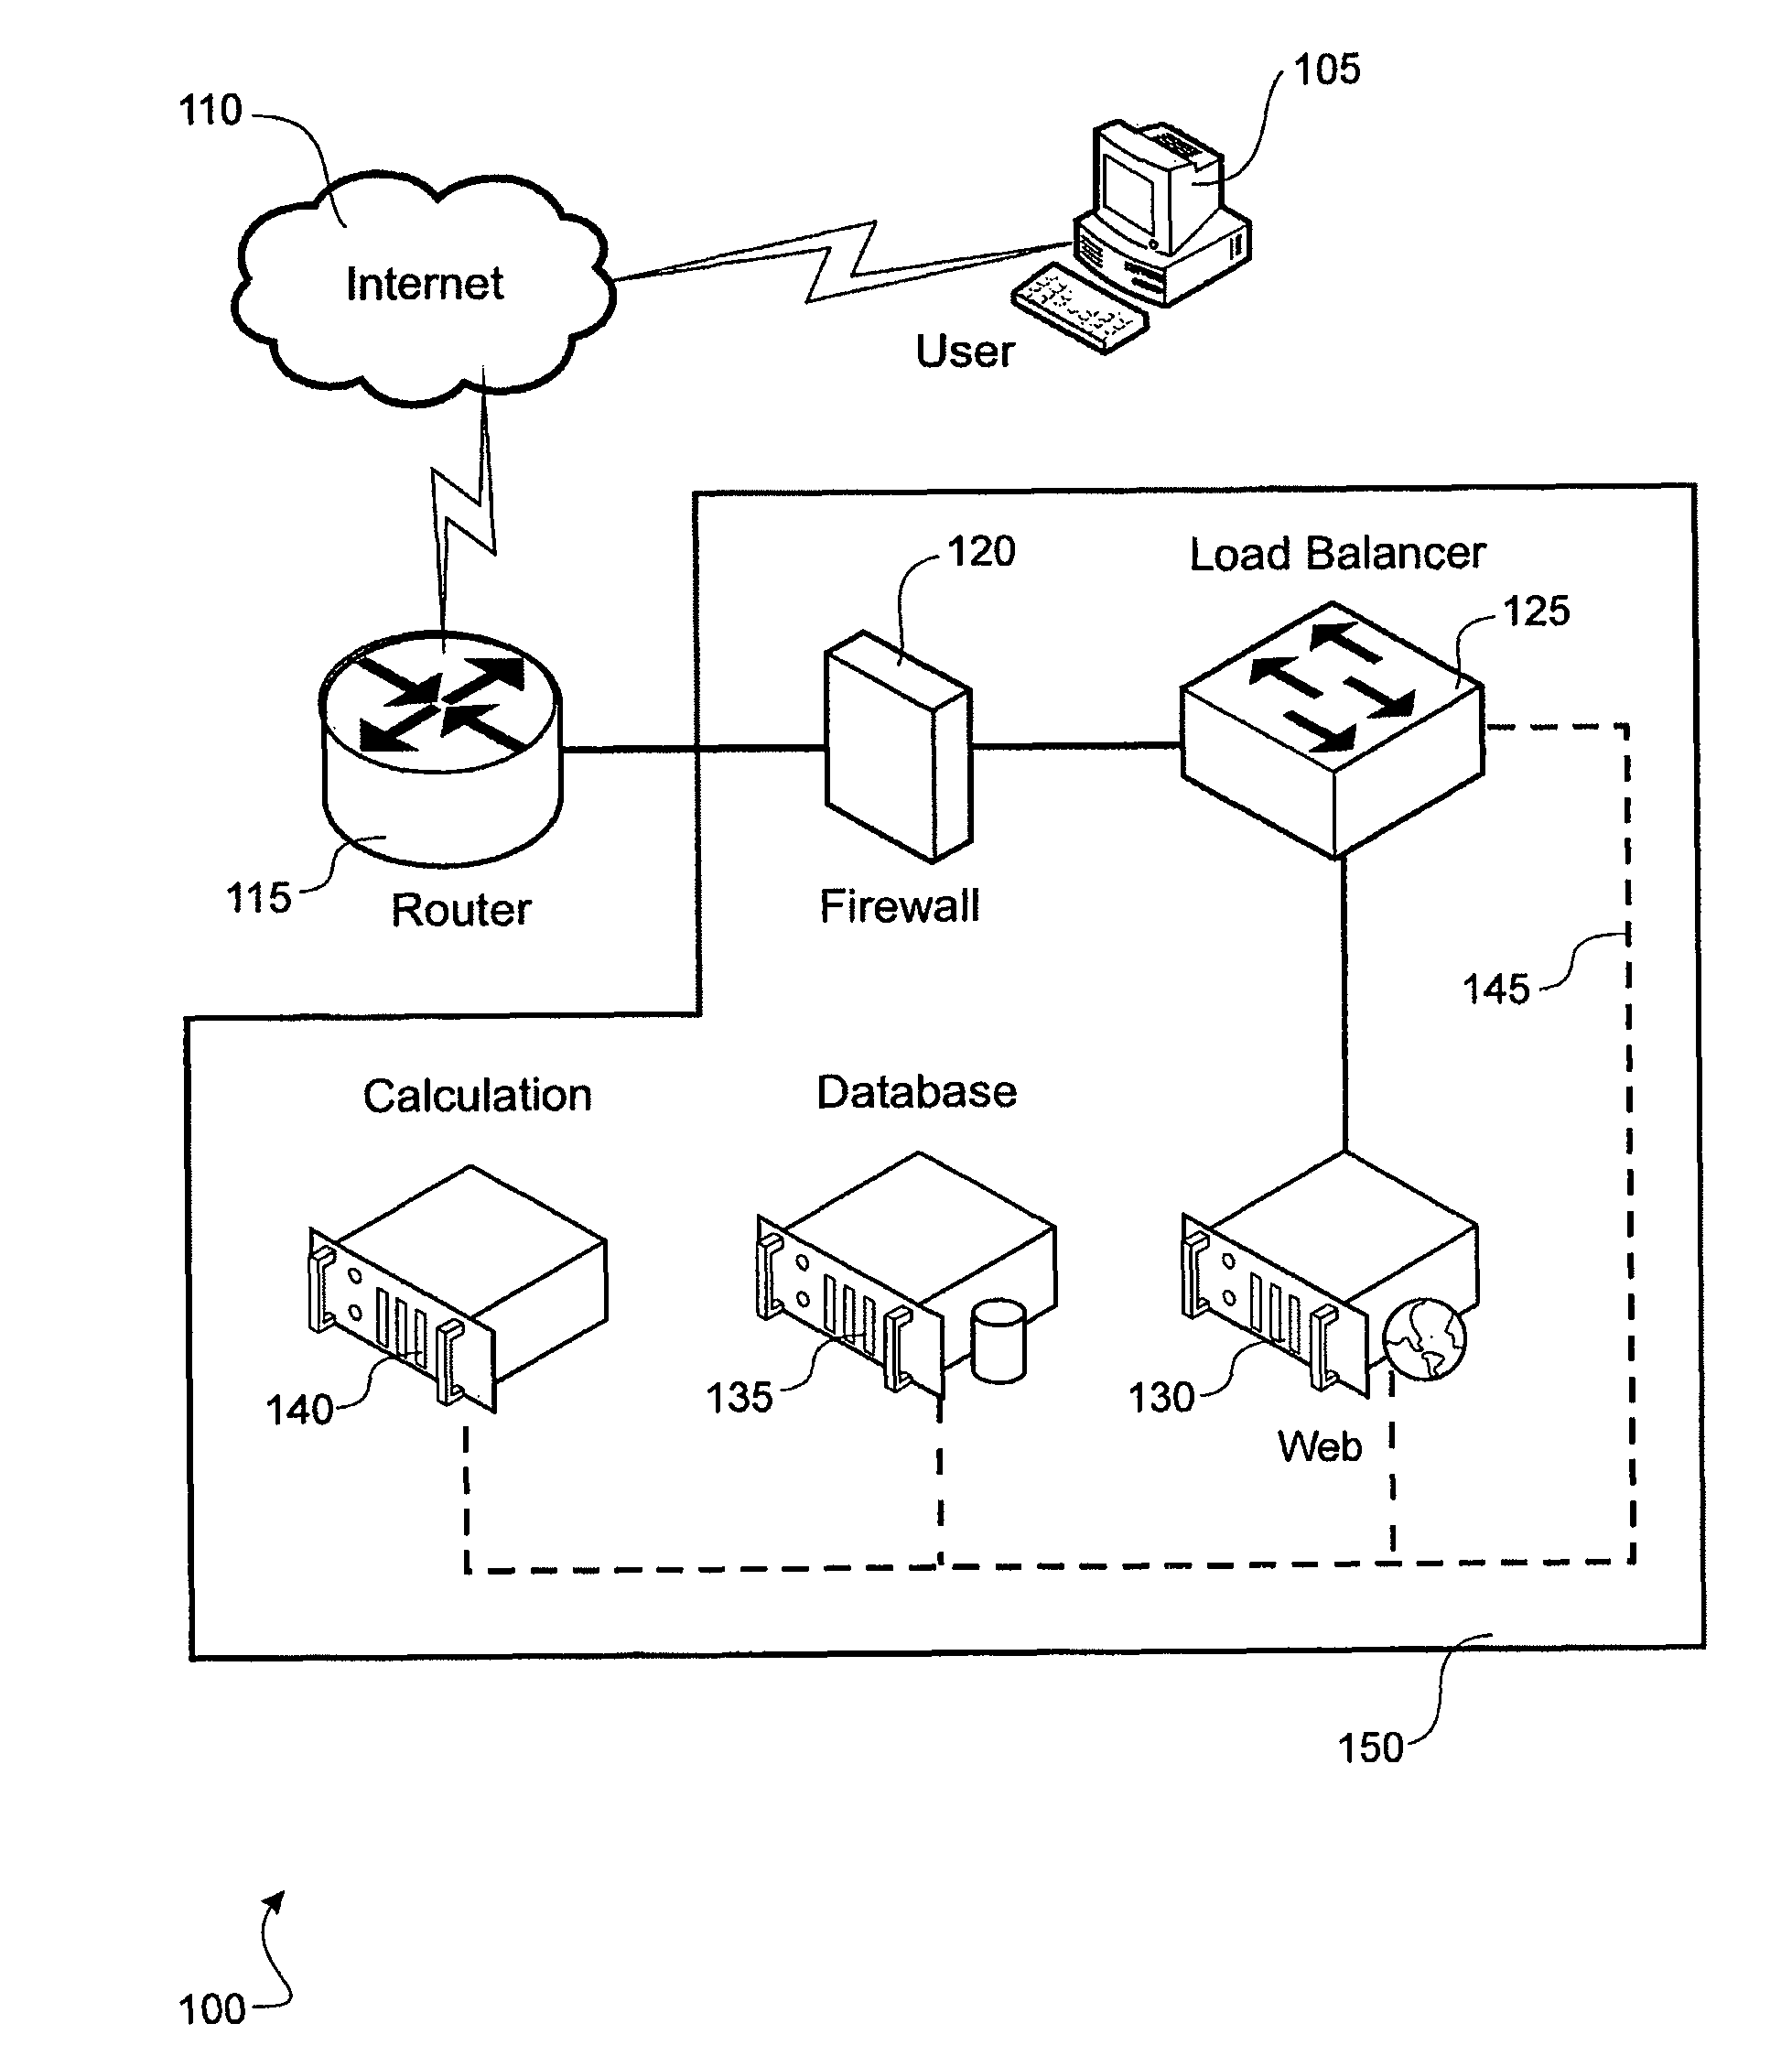 System and method for managing and predicting crop performance